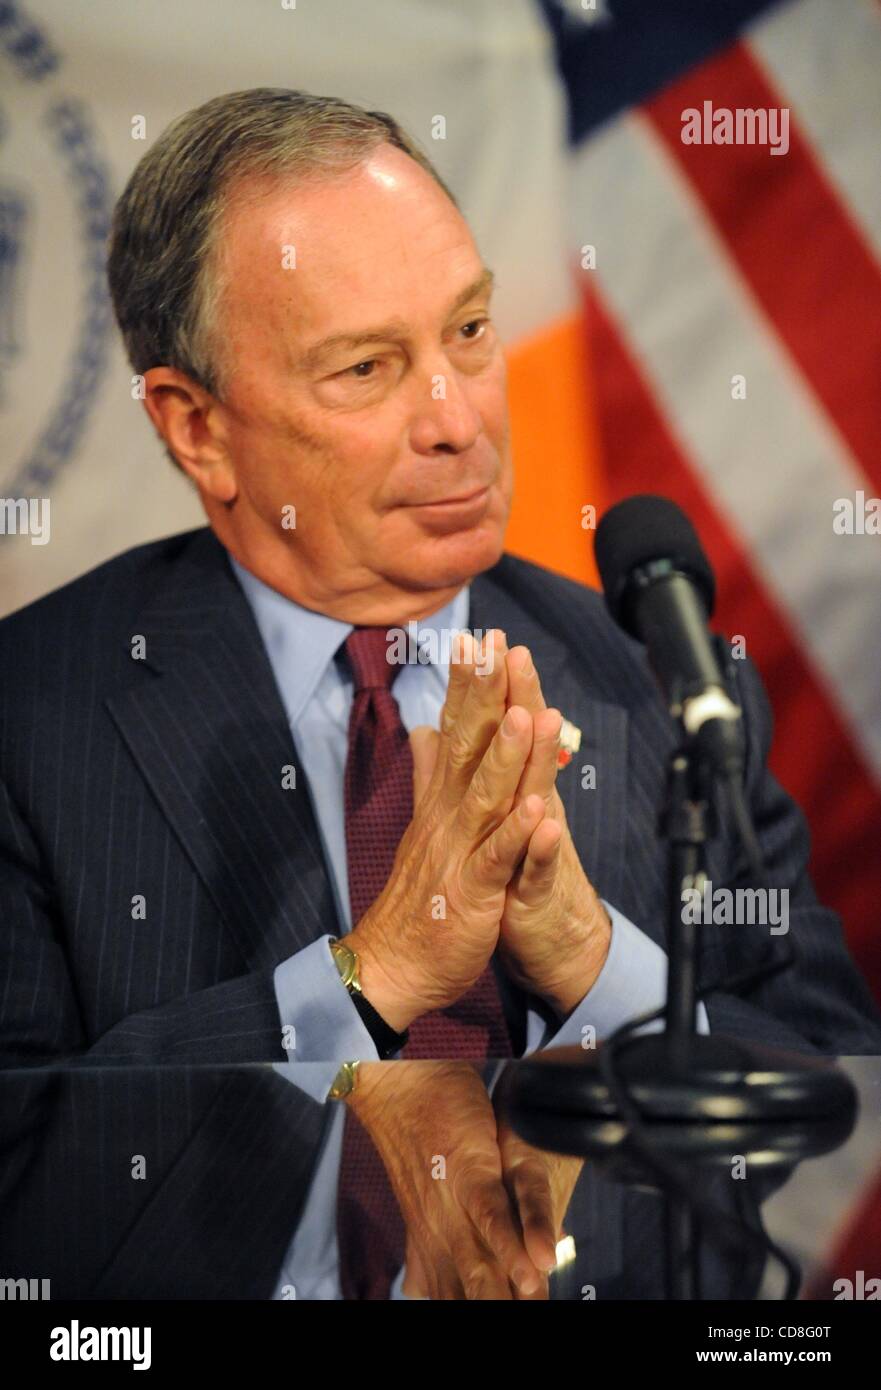 Nov 03, 2008 - Manhattan, New York, USA - At a ceremony in the Blue Room at City Hall Mayor MICHAEL R. BLOOMBERG signs into law Introduction 845-A, which extends term limits for city elected officials from two to three four-year terms following a lengthy public commentary at which over 130 New Yorke Stock Photo